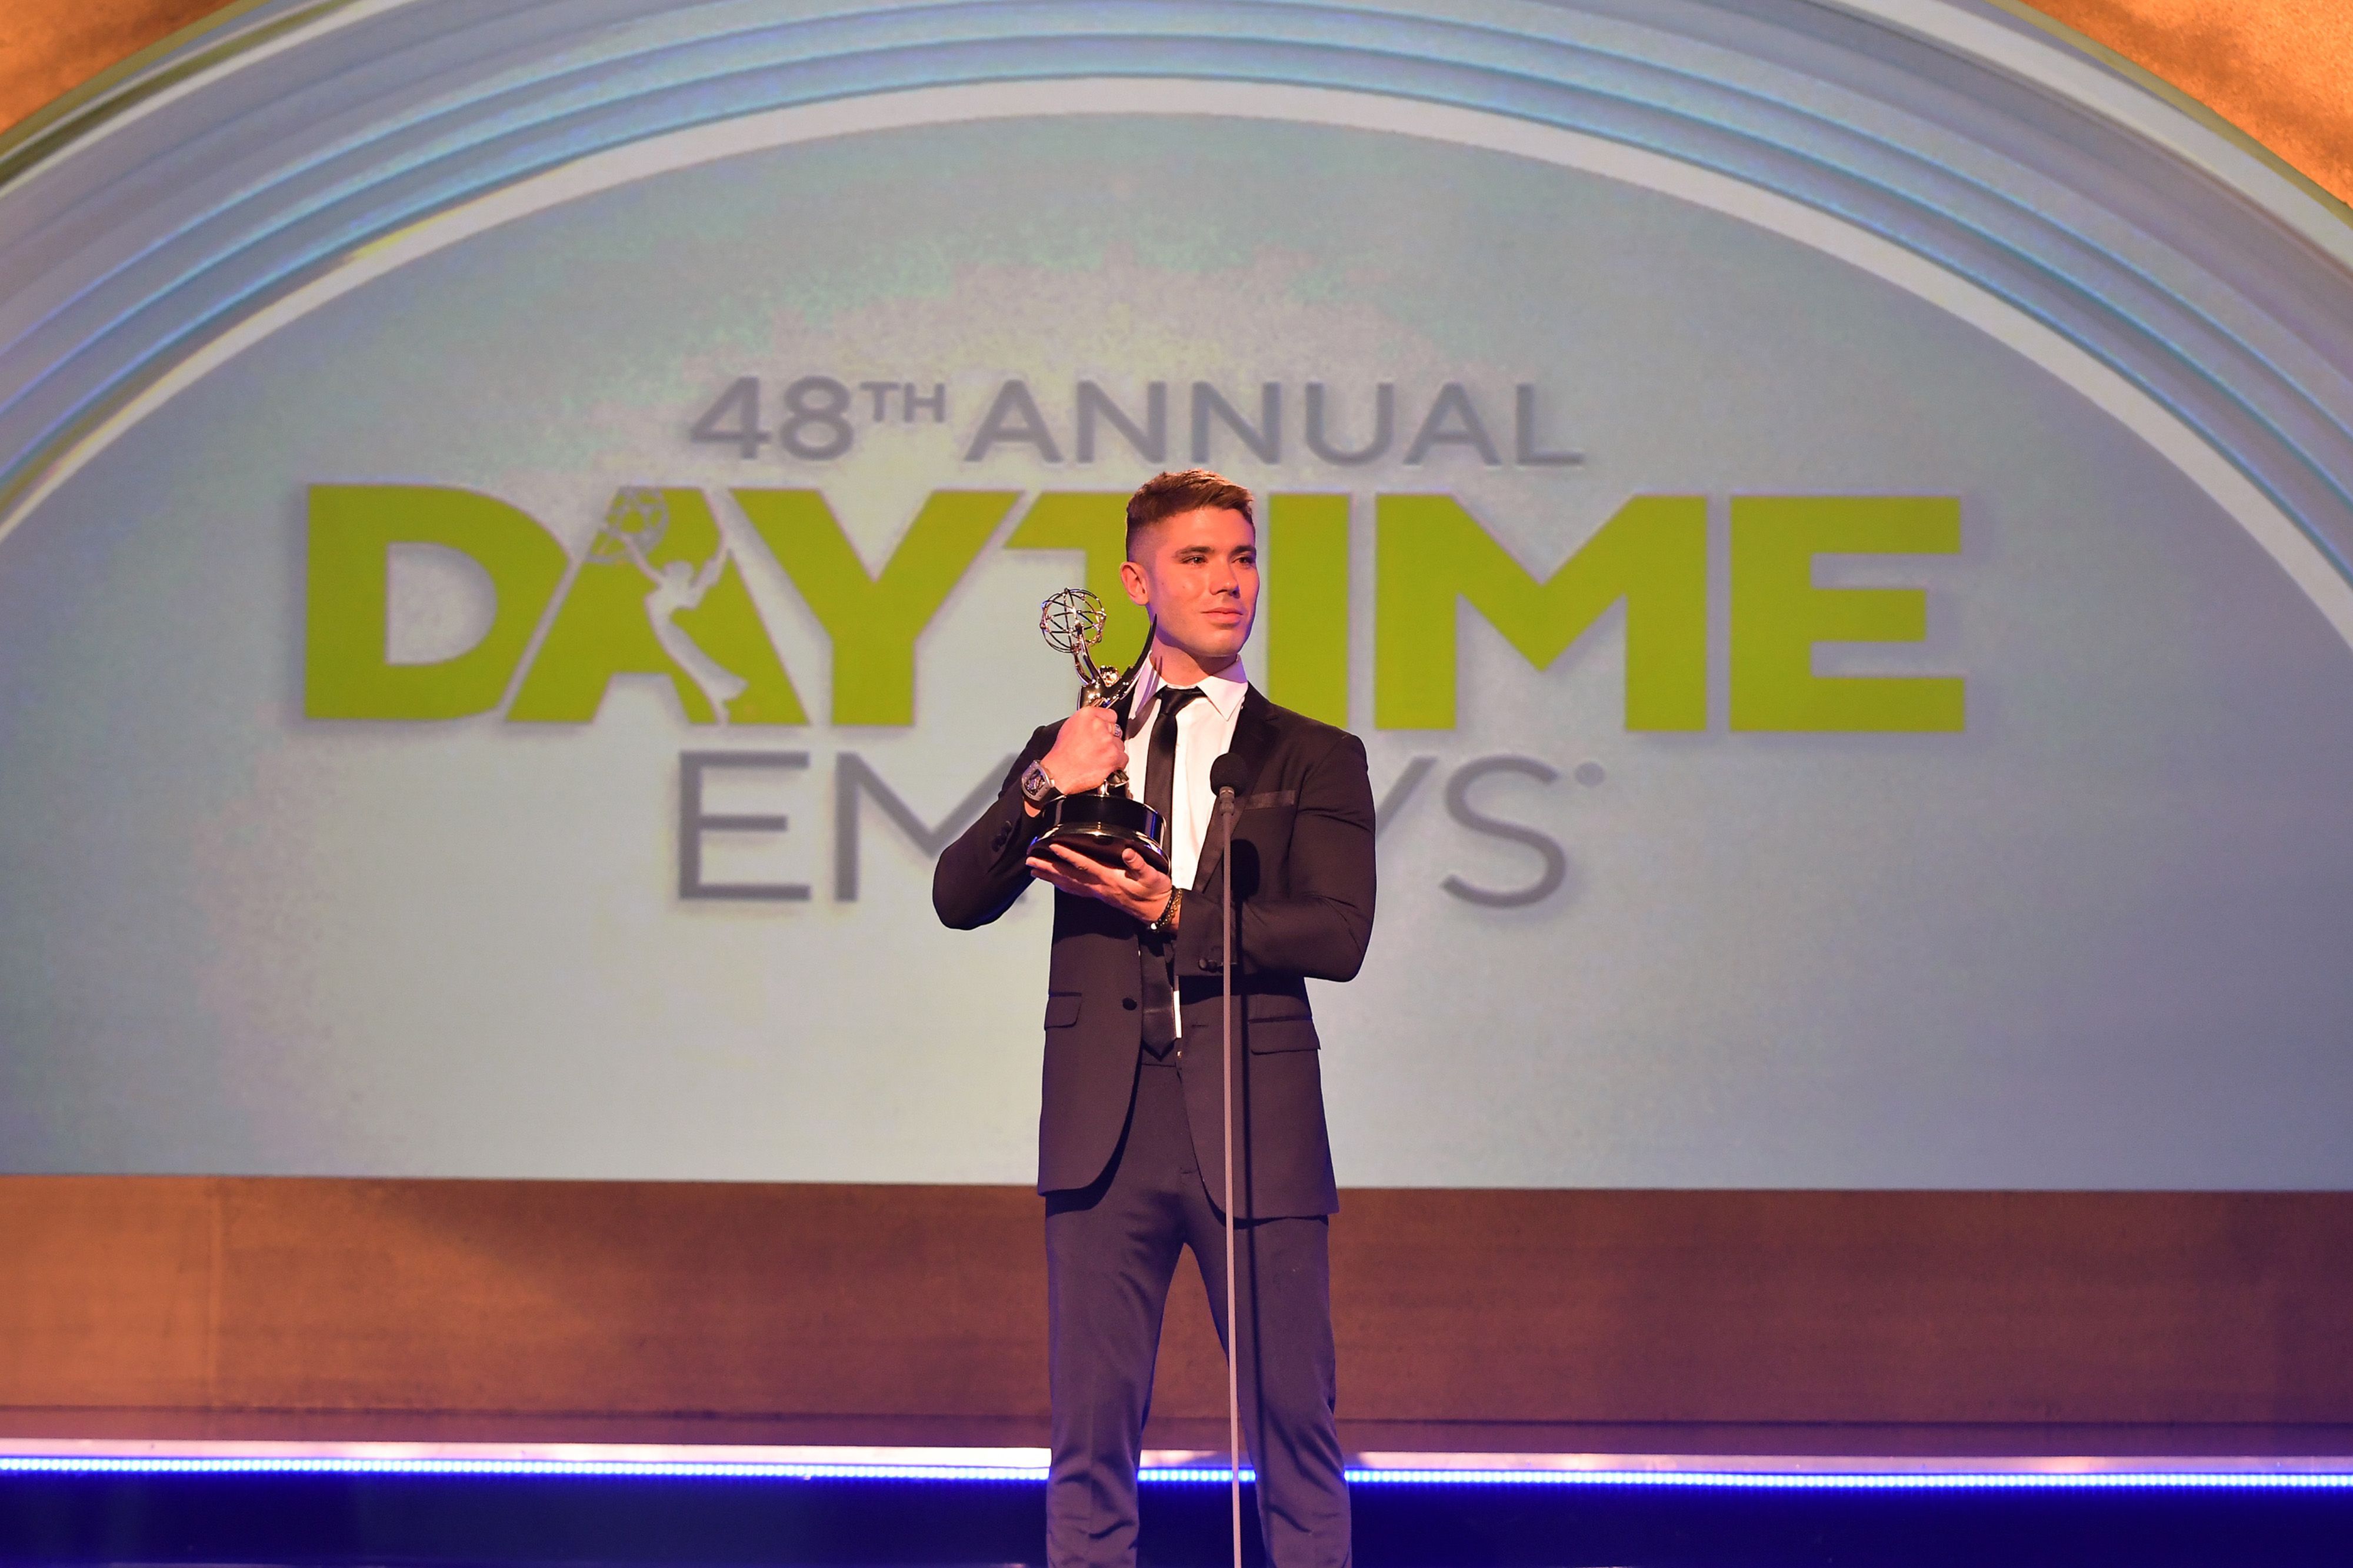 Kristos Andrews accepts the award for Outstanding Performance by a Lead Actor in a Daytime Fiction Program for "The Bay" during the 48th Annual Daytime Emmy Awards